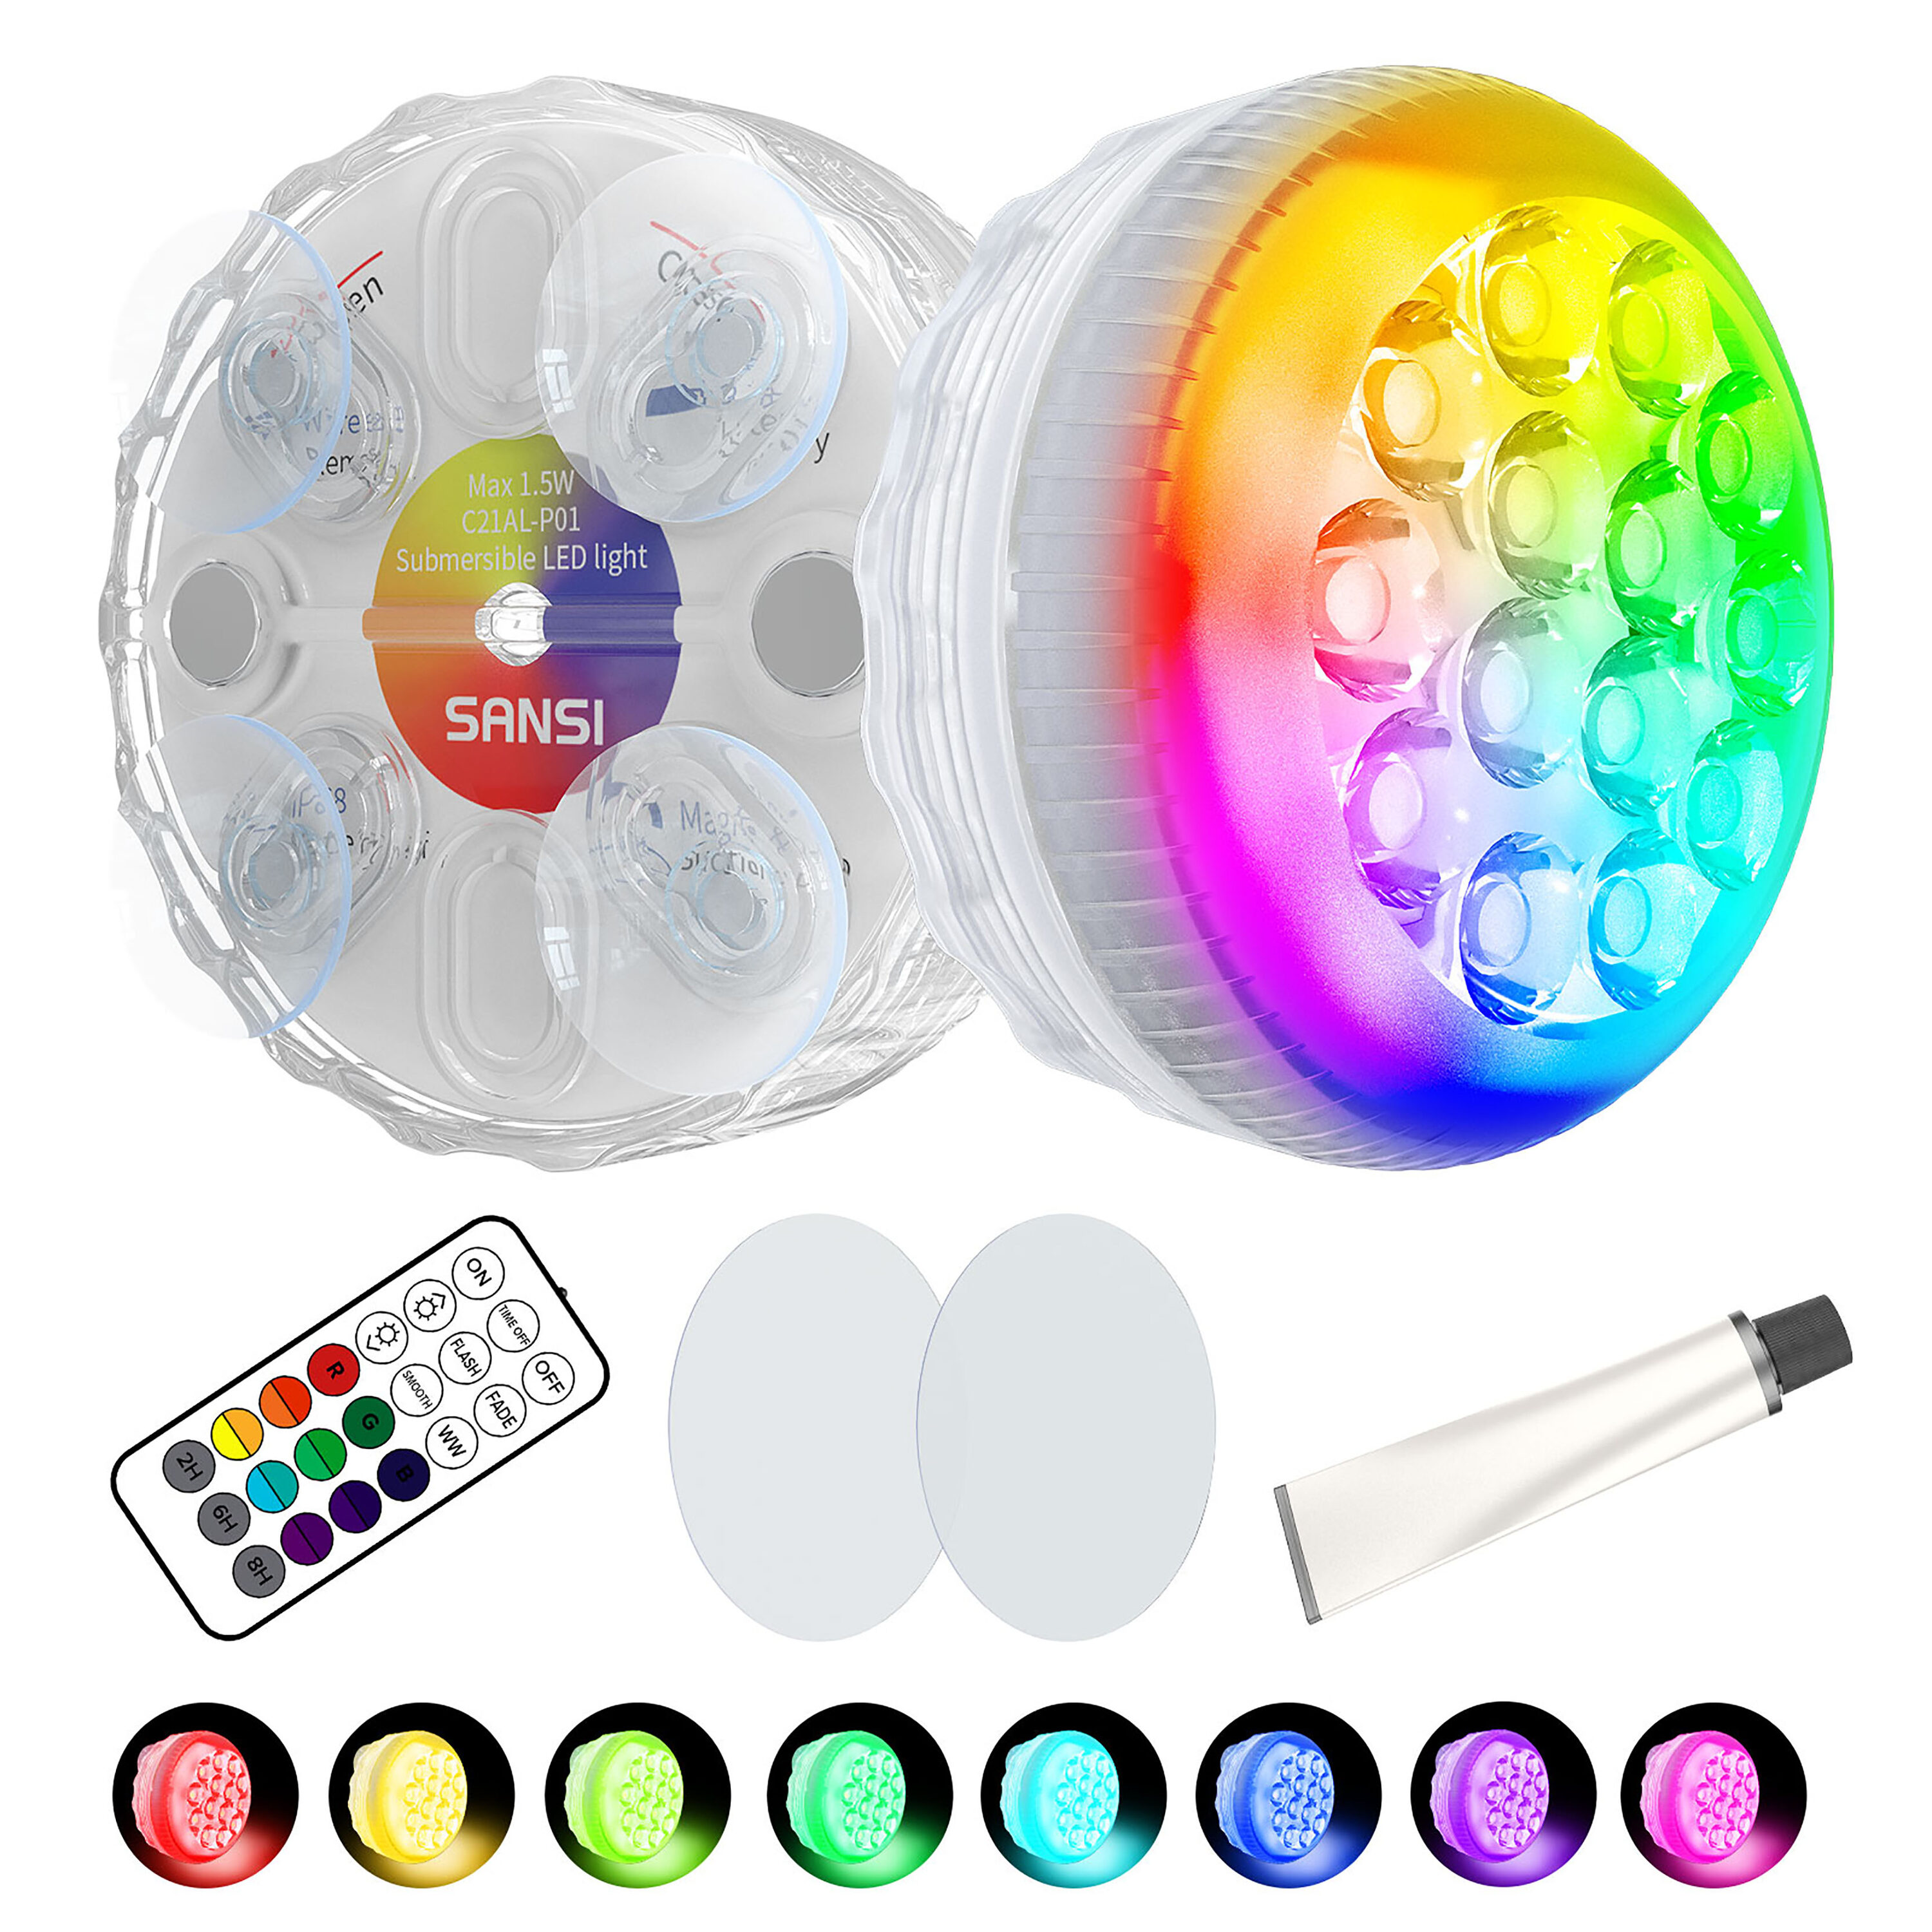 SANSI RGB Pool Lights, Submersible LED Pool Lights with Magnet and